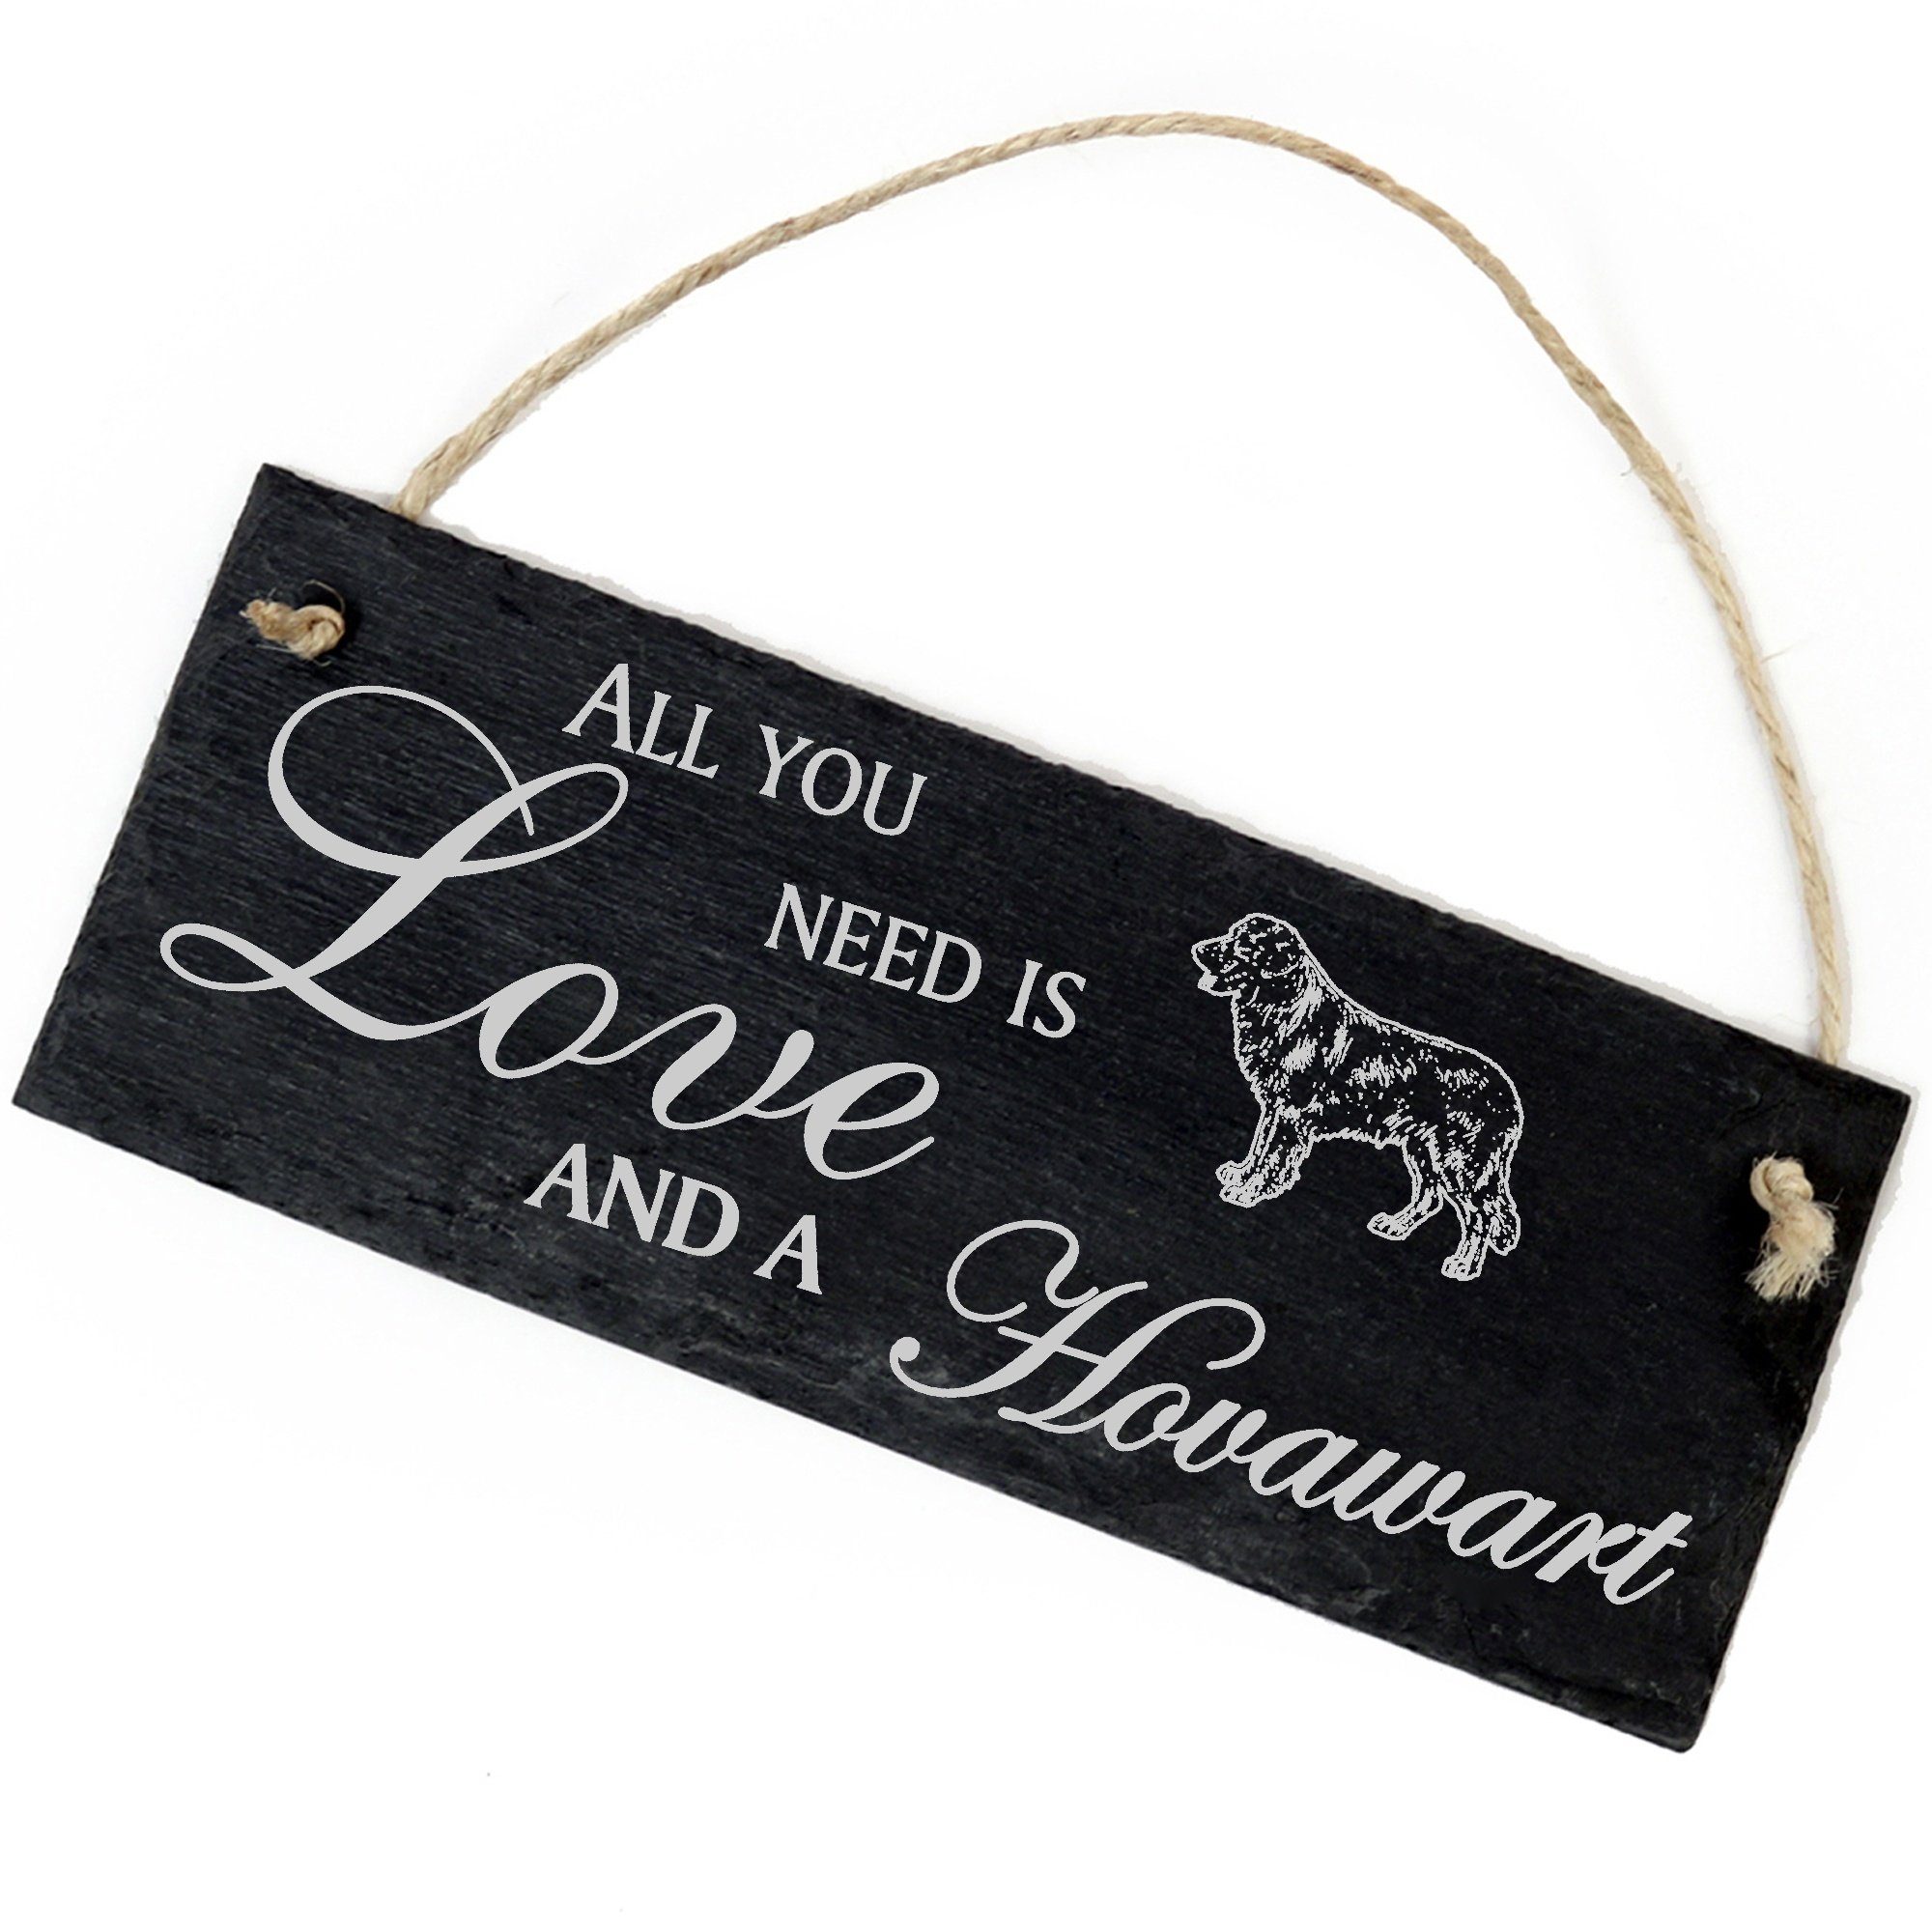 Dekolando Hängedekoration Hovawart 22x8cm All you need is Love and a Hovawart